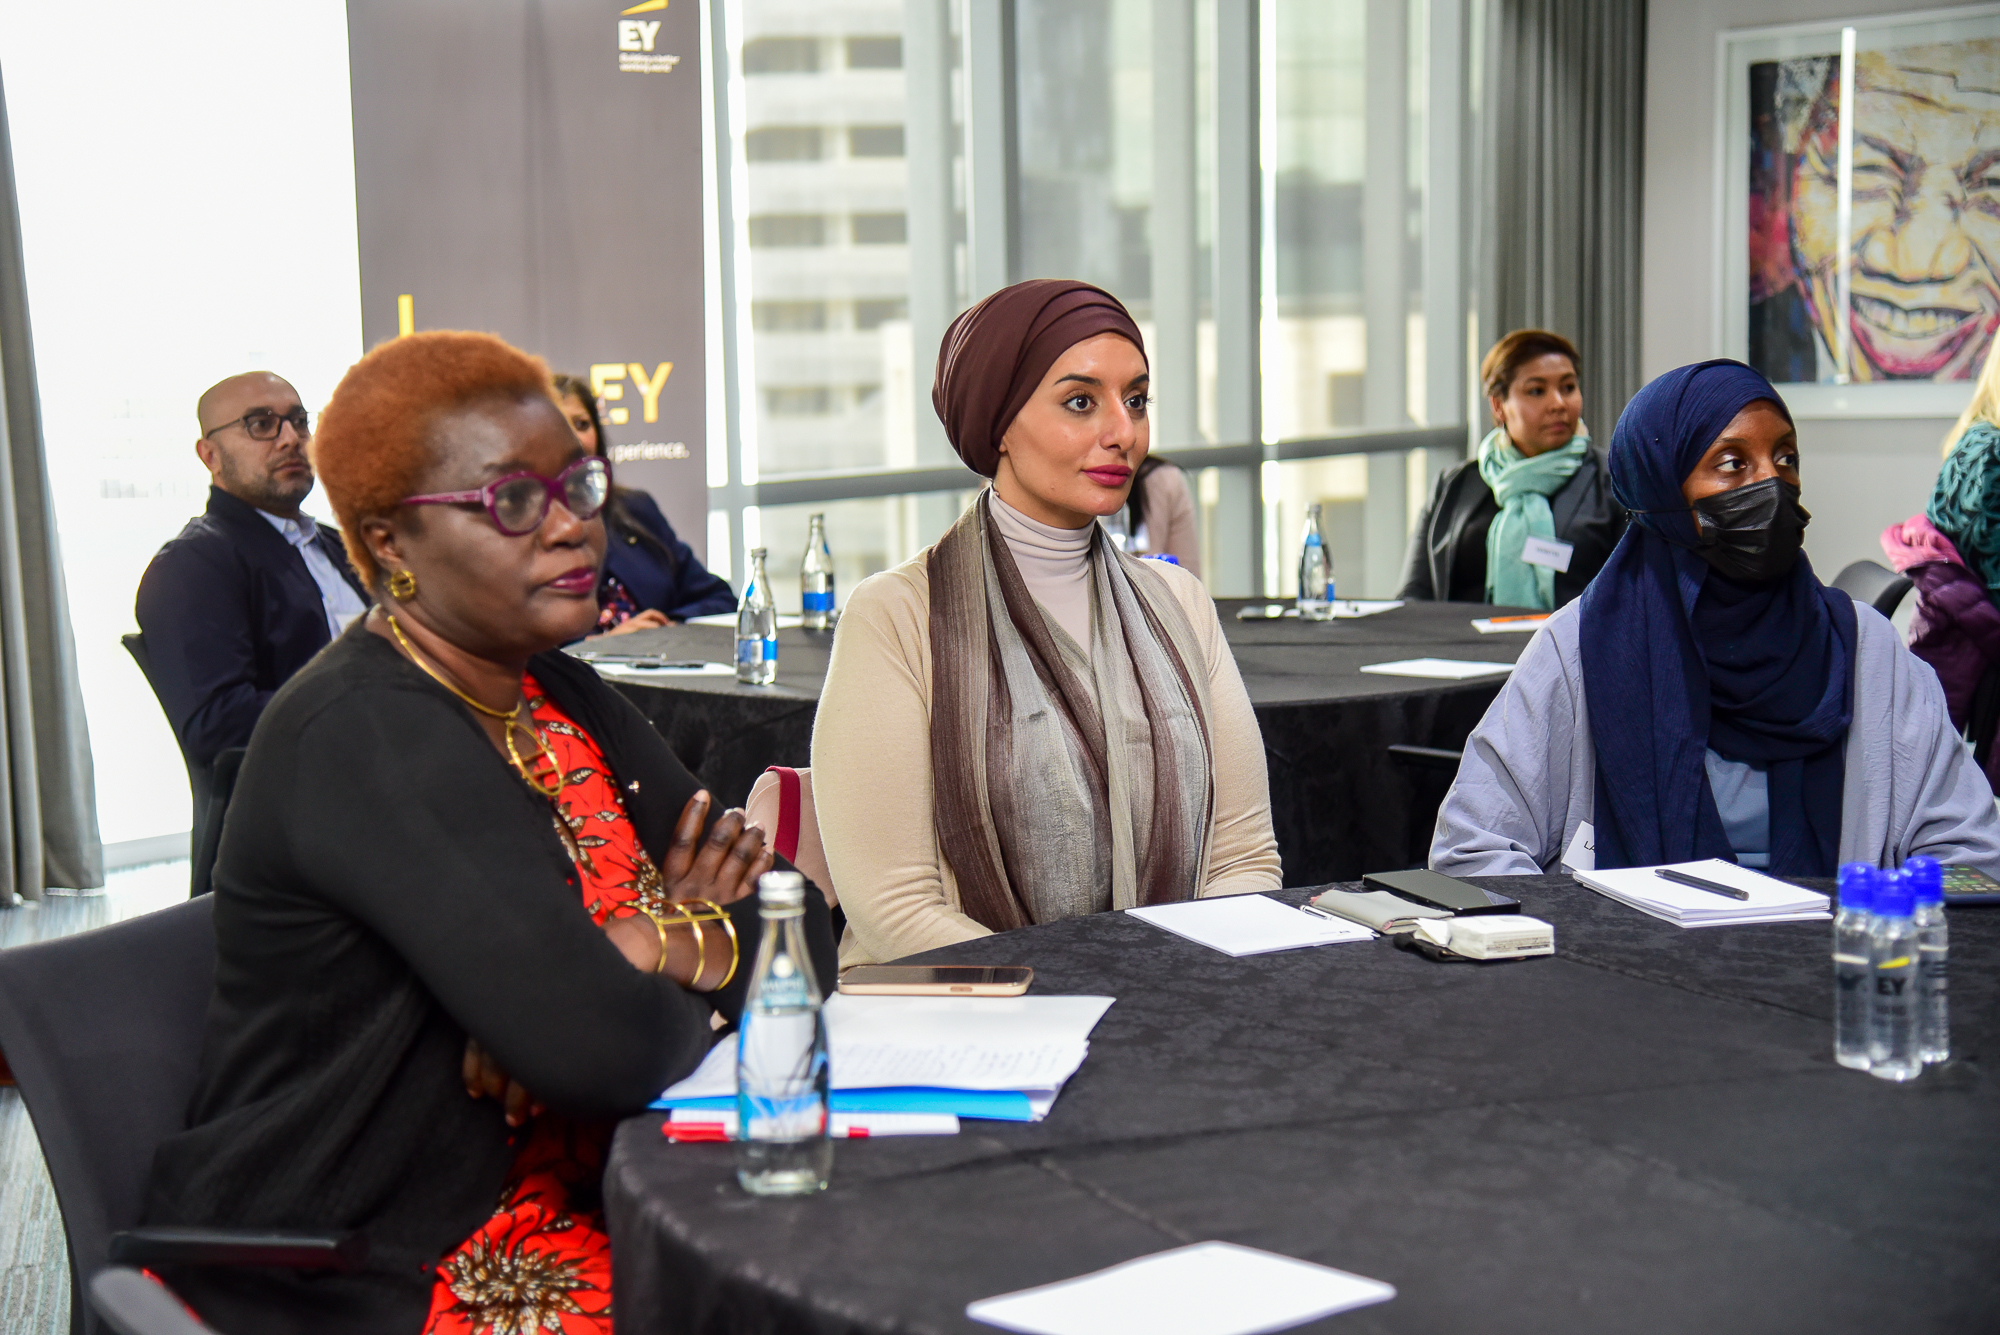 (From left) Dr. Jemimah Njuki, H.E Reem bin Karam and Lawratou Bah listening to presentations at EY offices in Sandton on the second day of the high-level mission (Photo: UN Women/James Ochweri)